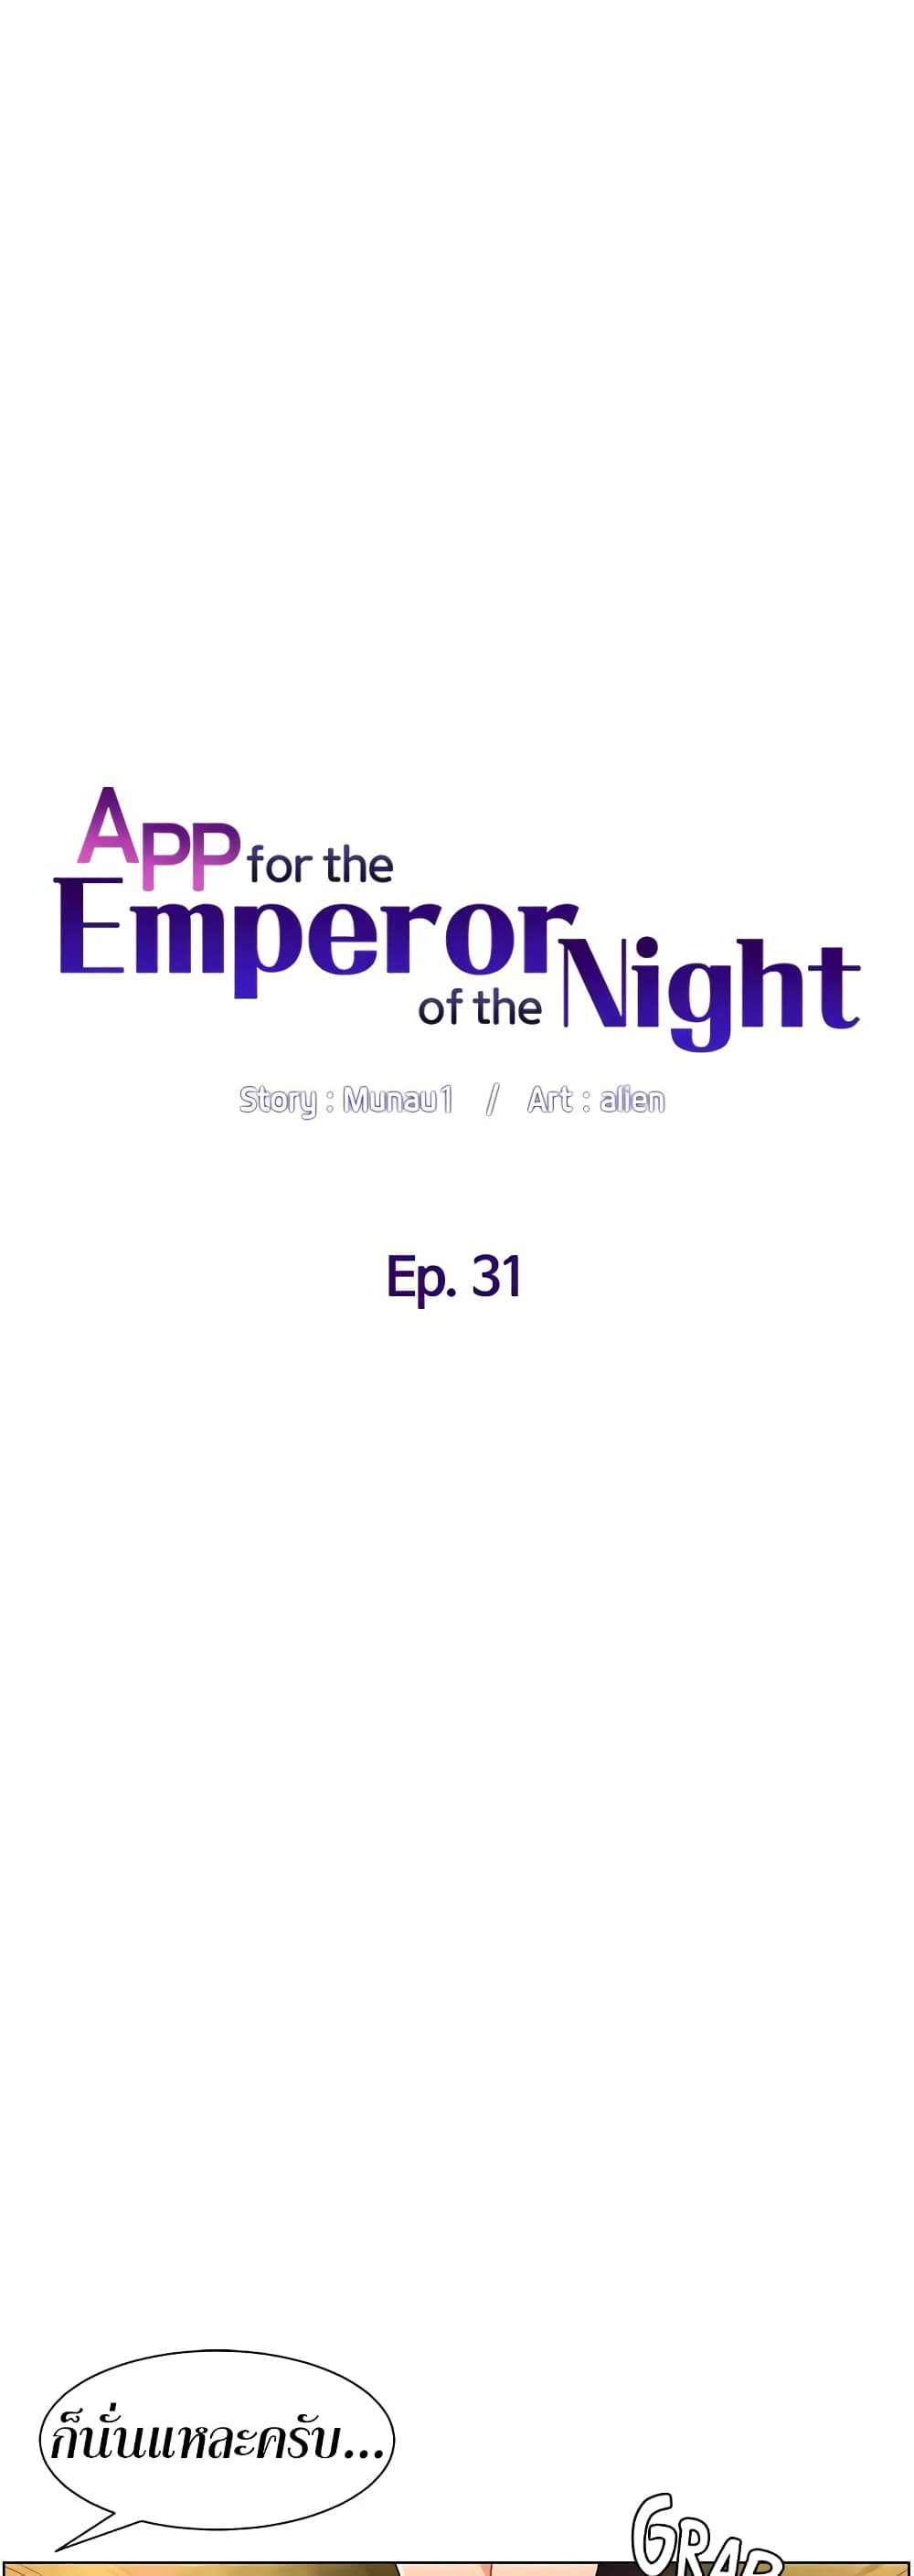 APP for the Emperor of the Night 31-31